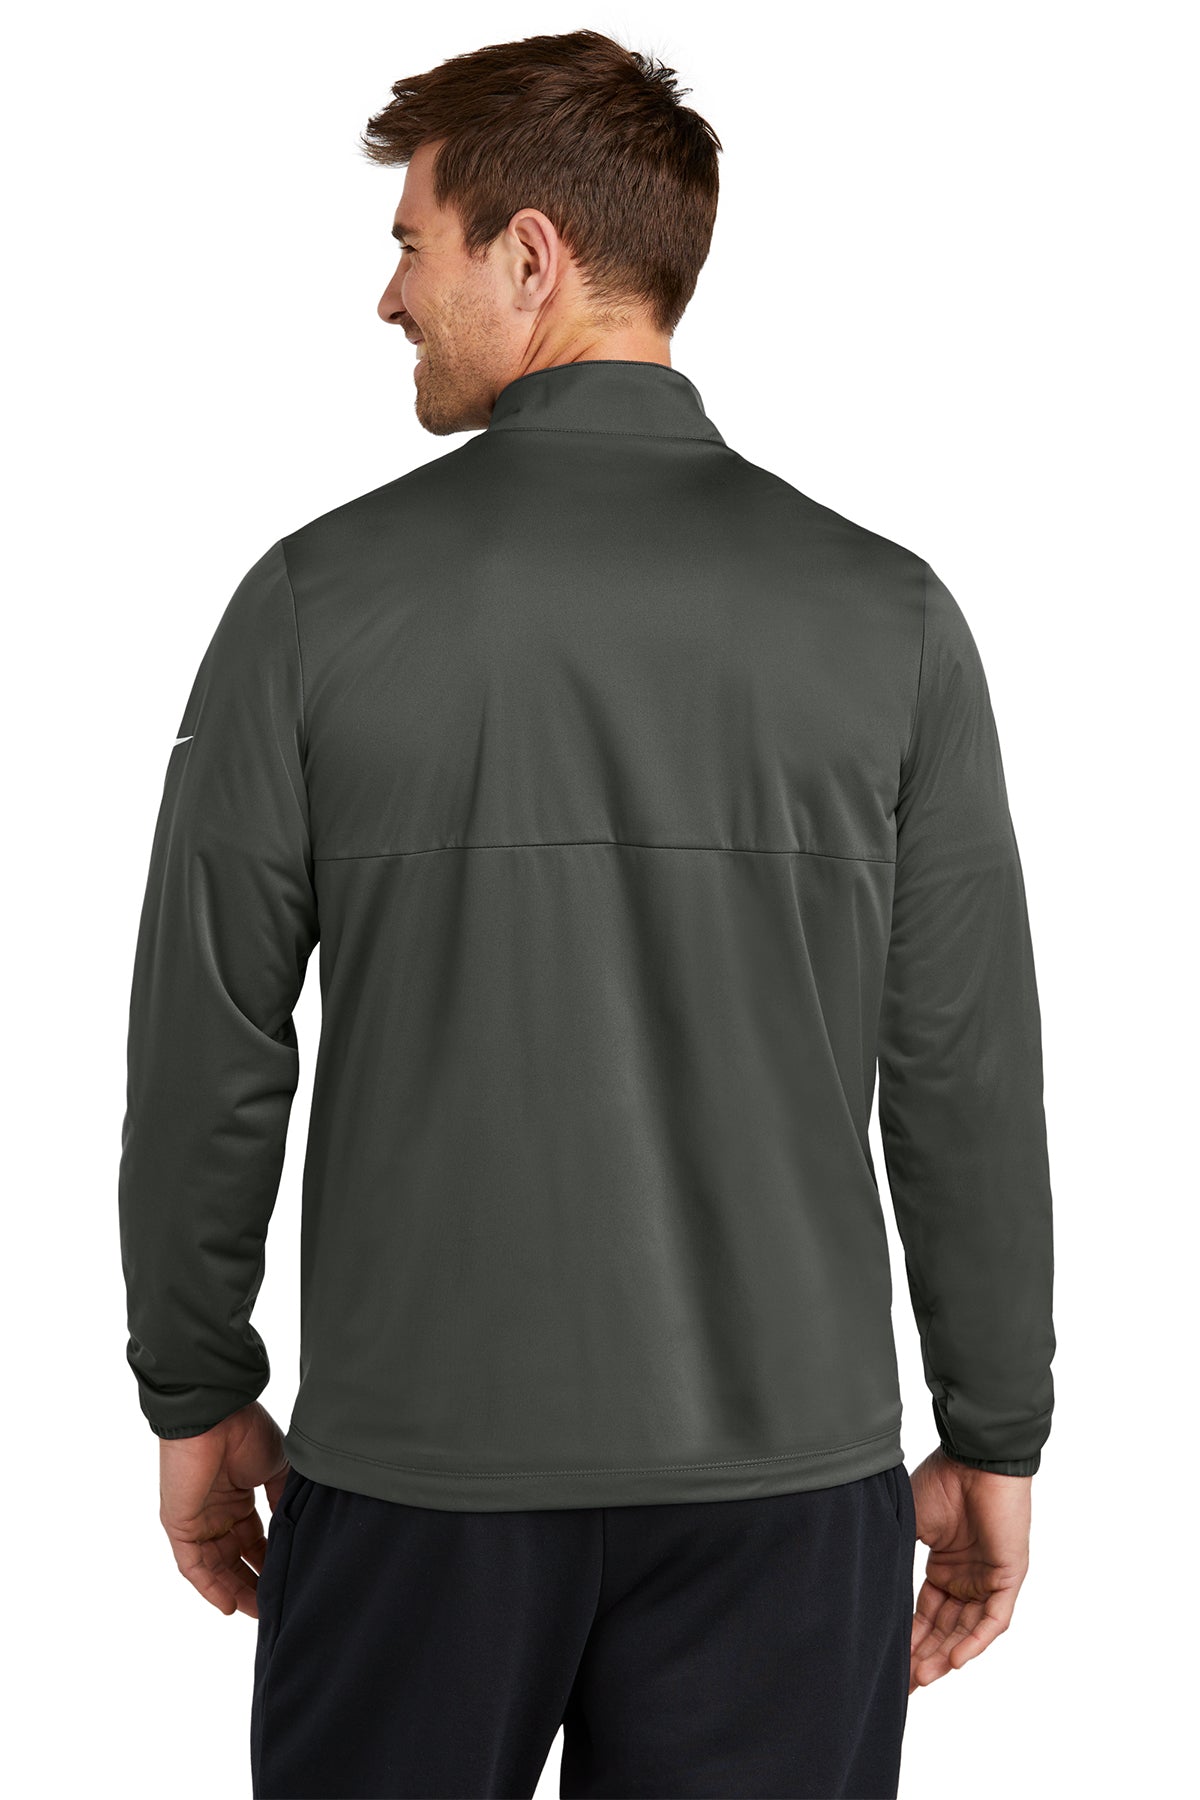 Nike Storm-FIT Full-Zip Custom Jackets, Anthracite